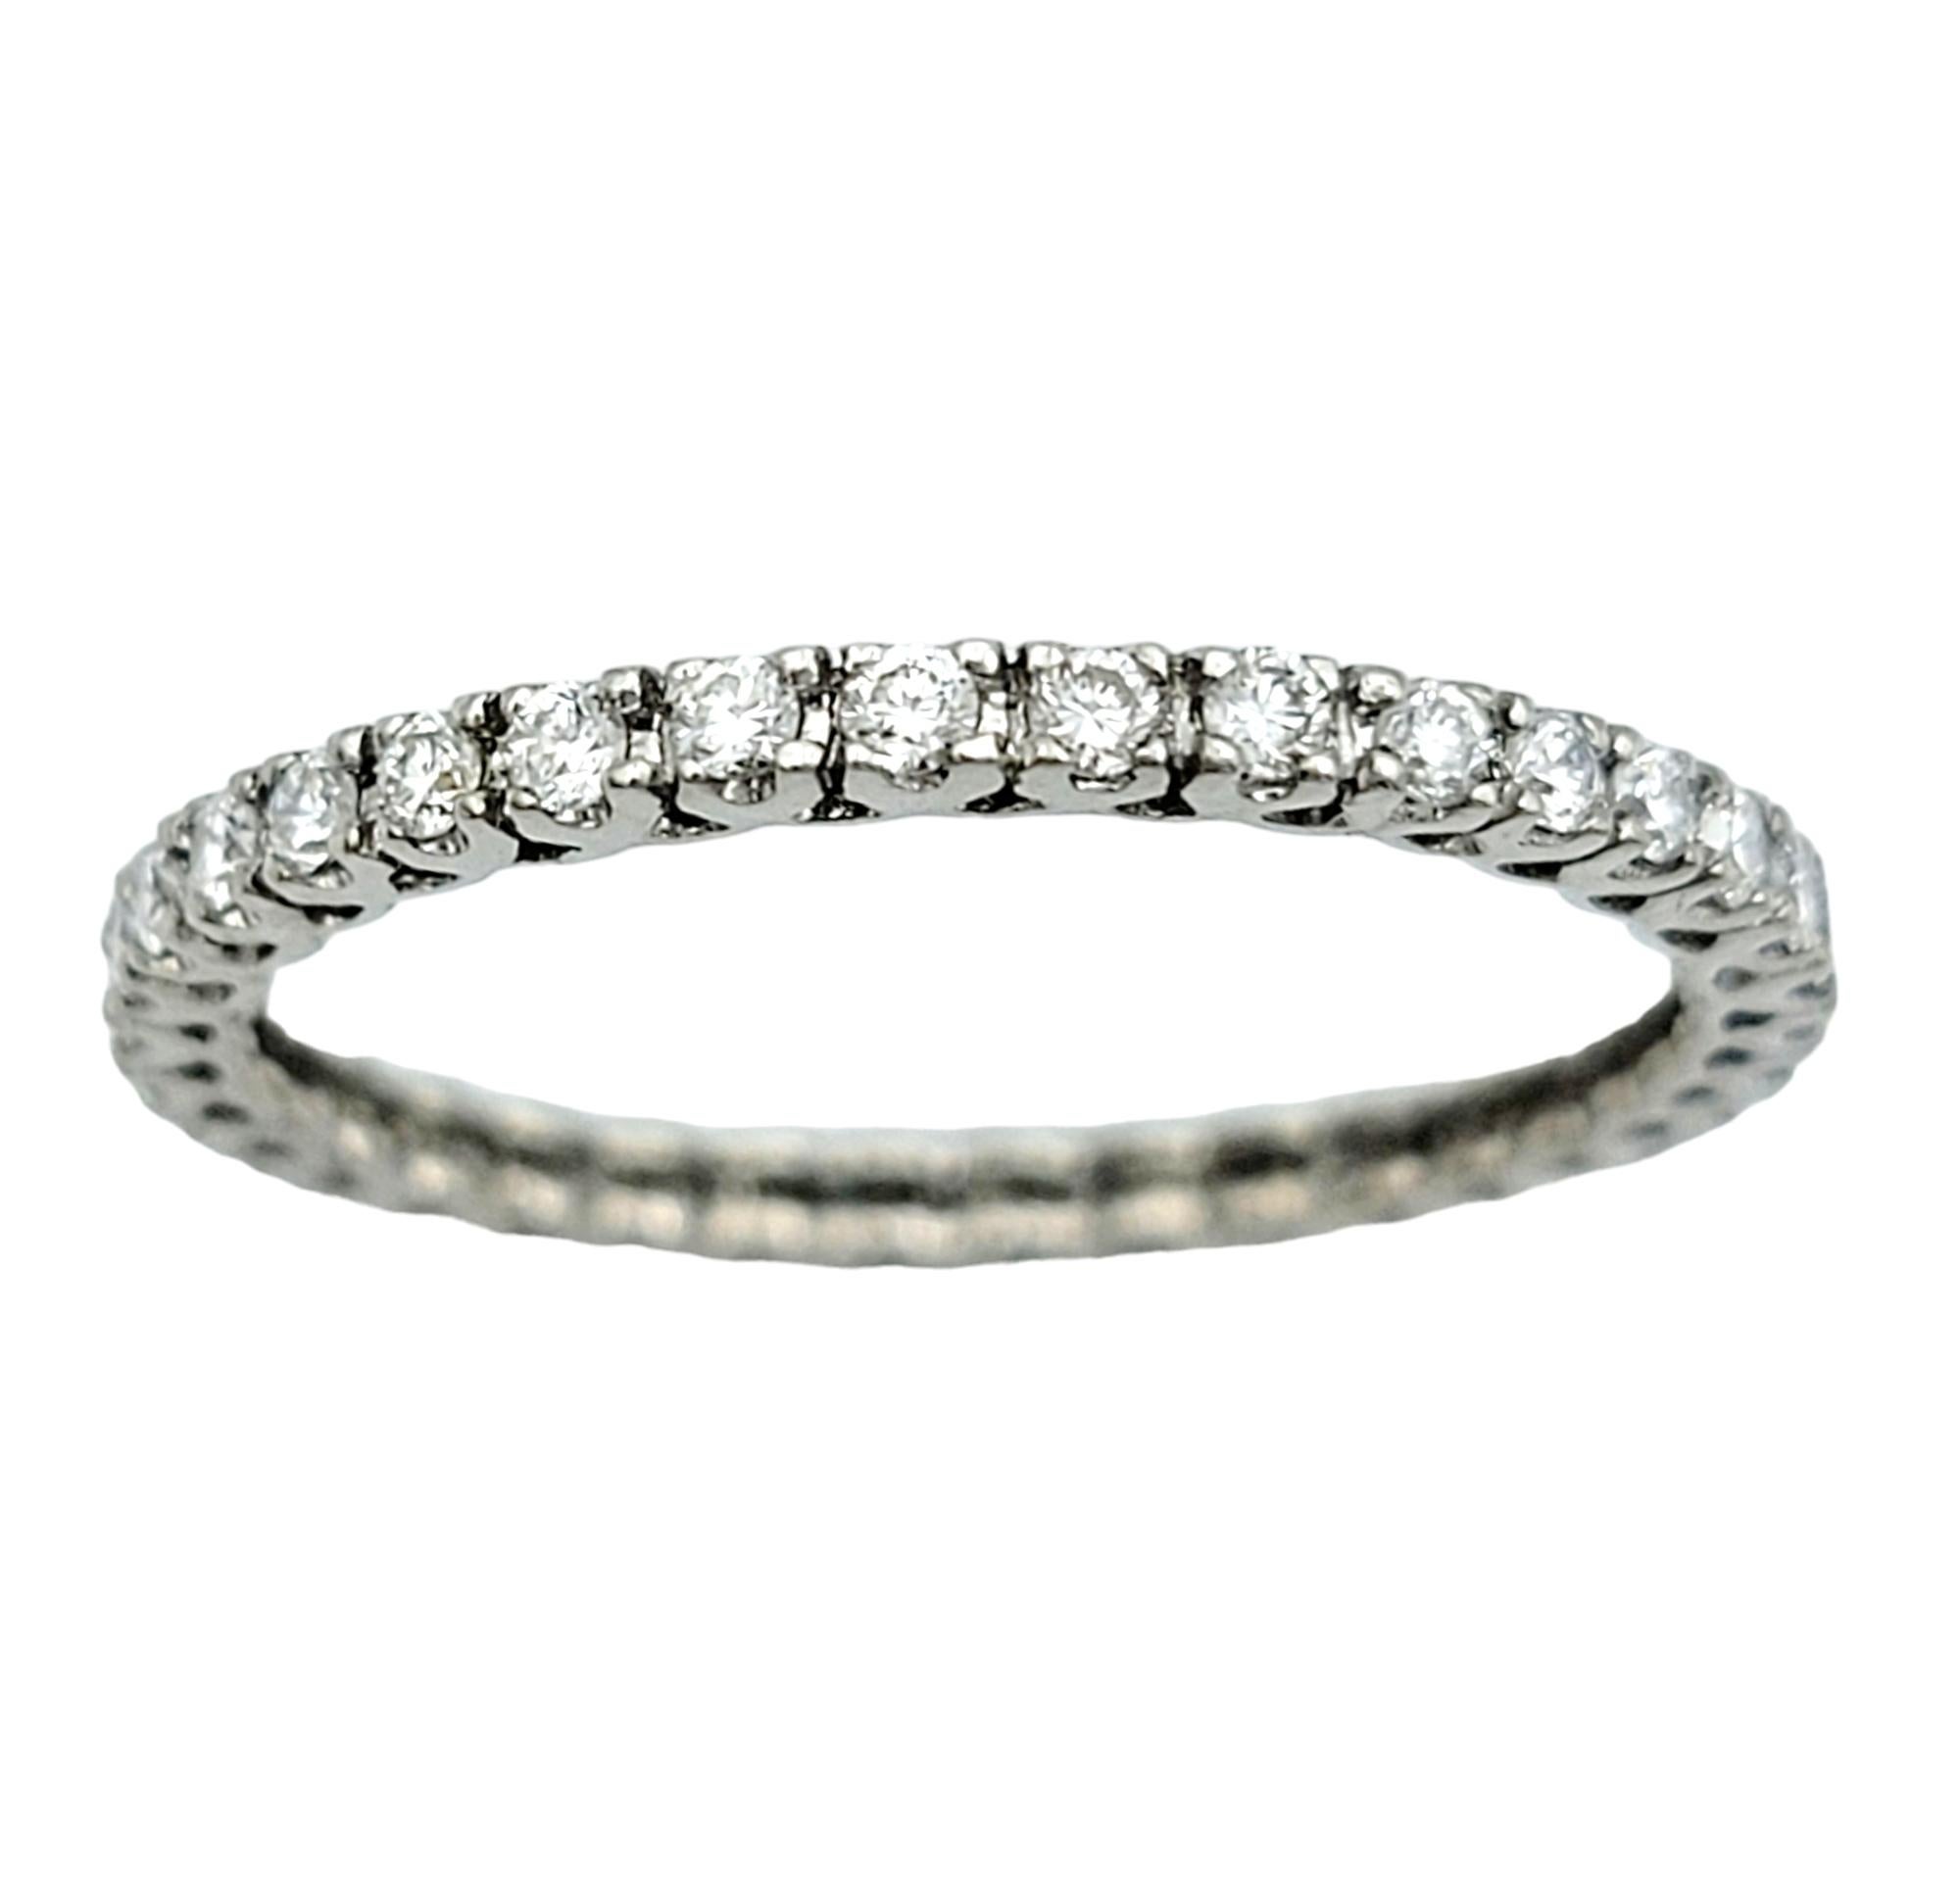 Contemporary Round Brilliant Diamond Eternity Band Ring 1.5 mm Set in 18 Karat White Gold For Sale